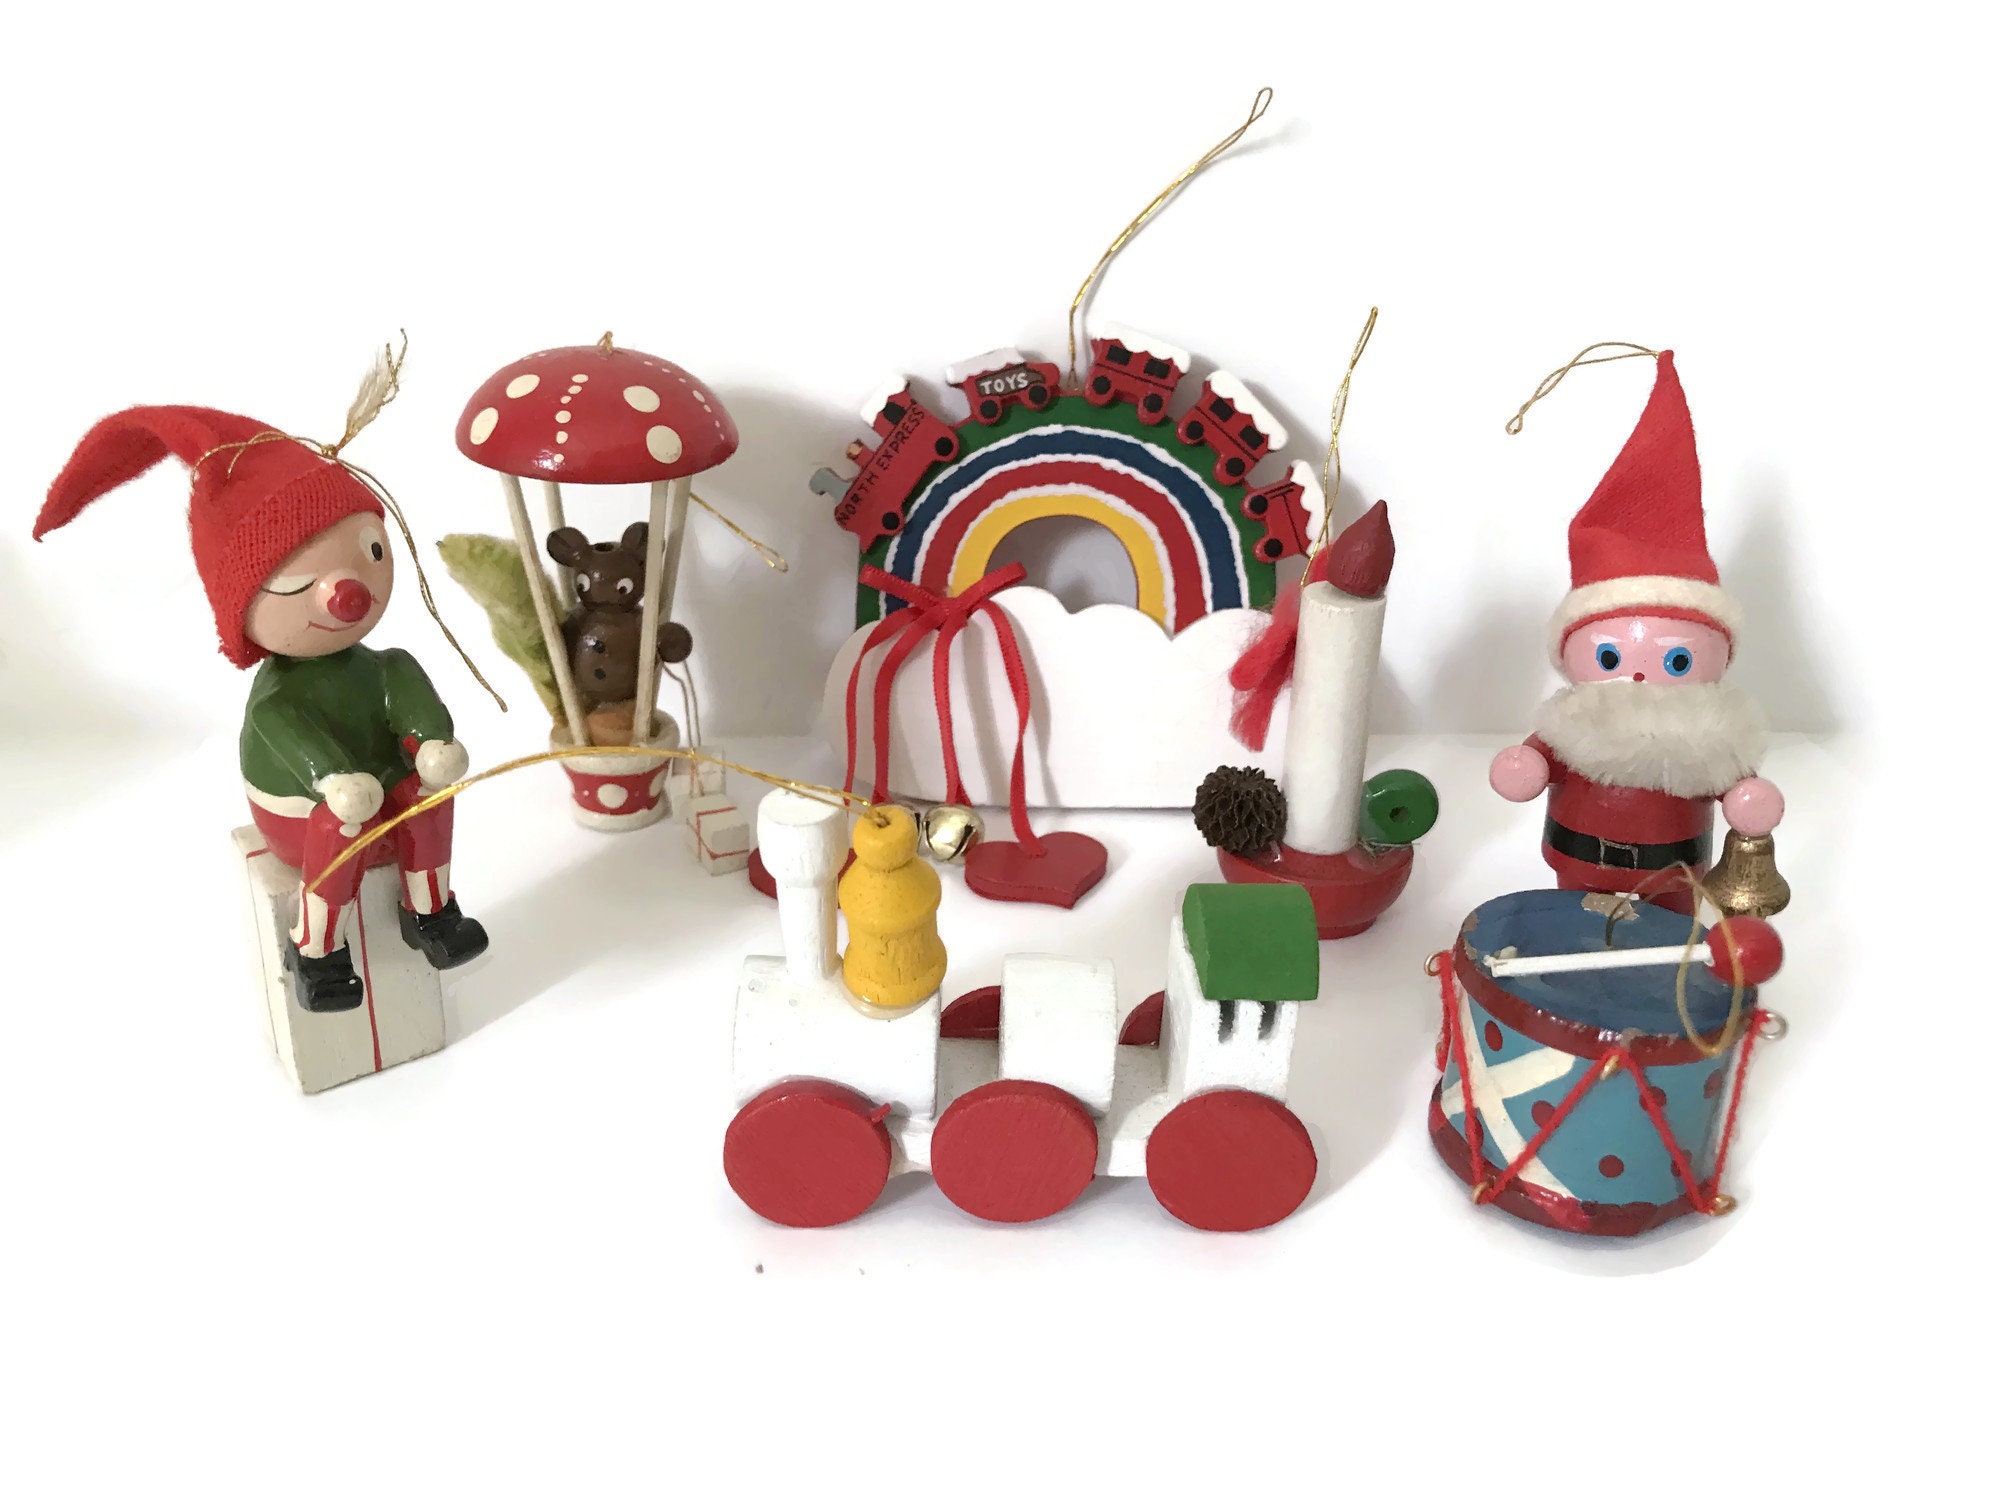 Vintage wooden Christmas ornament sets that you could paint (1974) - Click  Americana